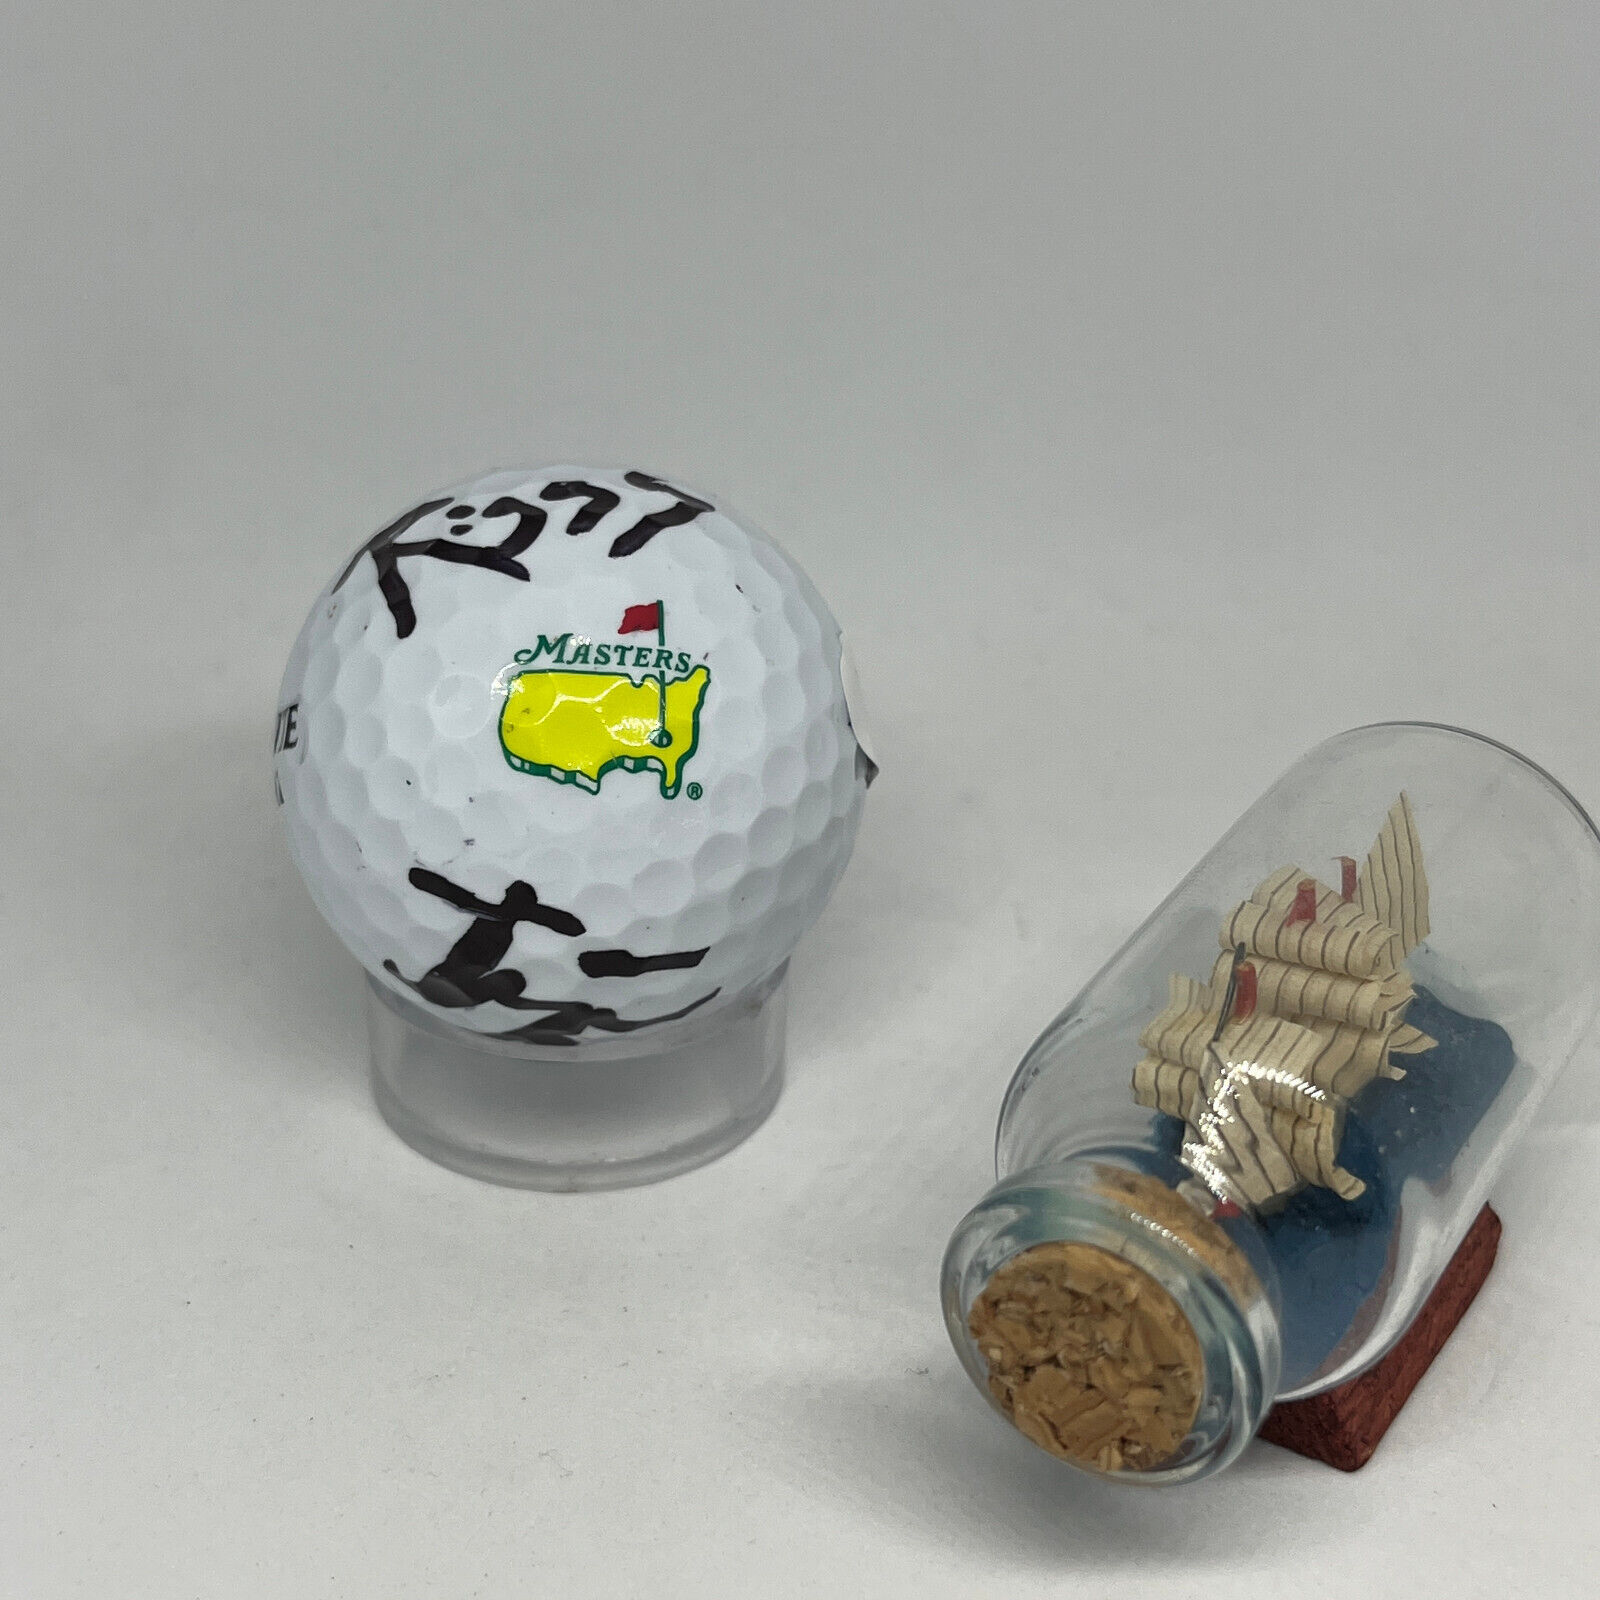 Barstool Sports Foreplay Signed Masters Golf Ball Jsa Auto Riggs Frankie A2540